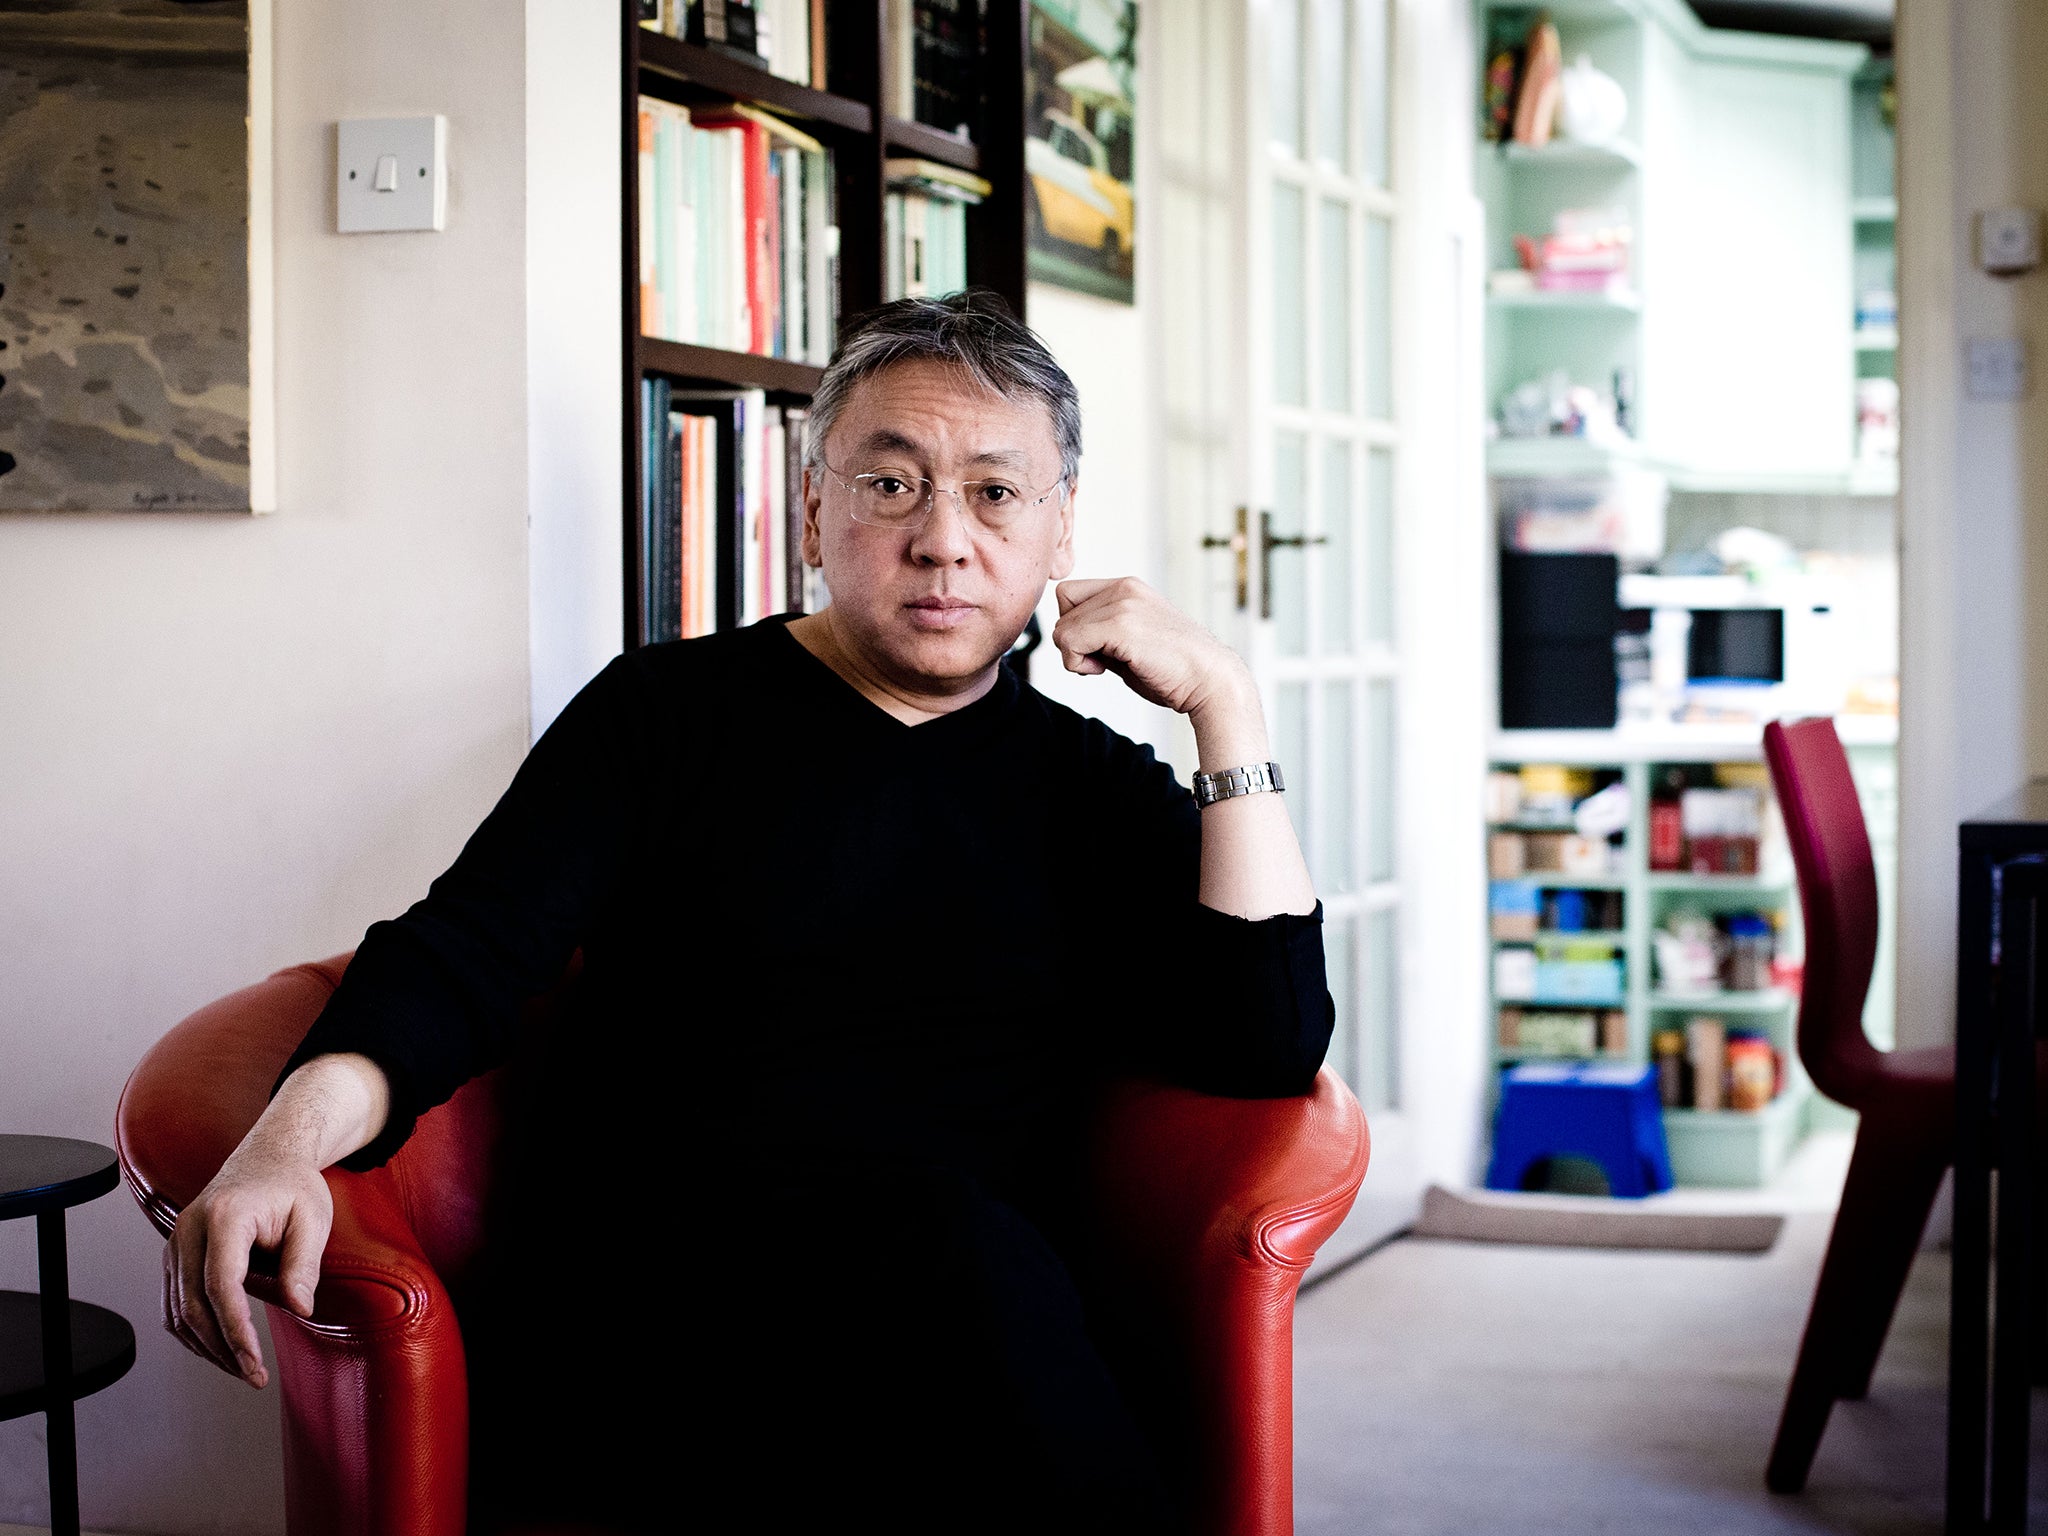 Kazuo Ishiguro, one of the most celebrated contemporary fiction authors in the English-speaking world, having received four Man Booker Prize nominations, and winning the 1989 award for his novel The Remains of the Day. Photographed at his home in North Lo